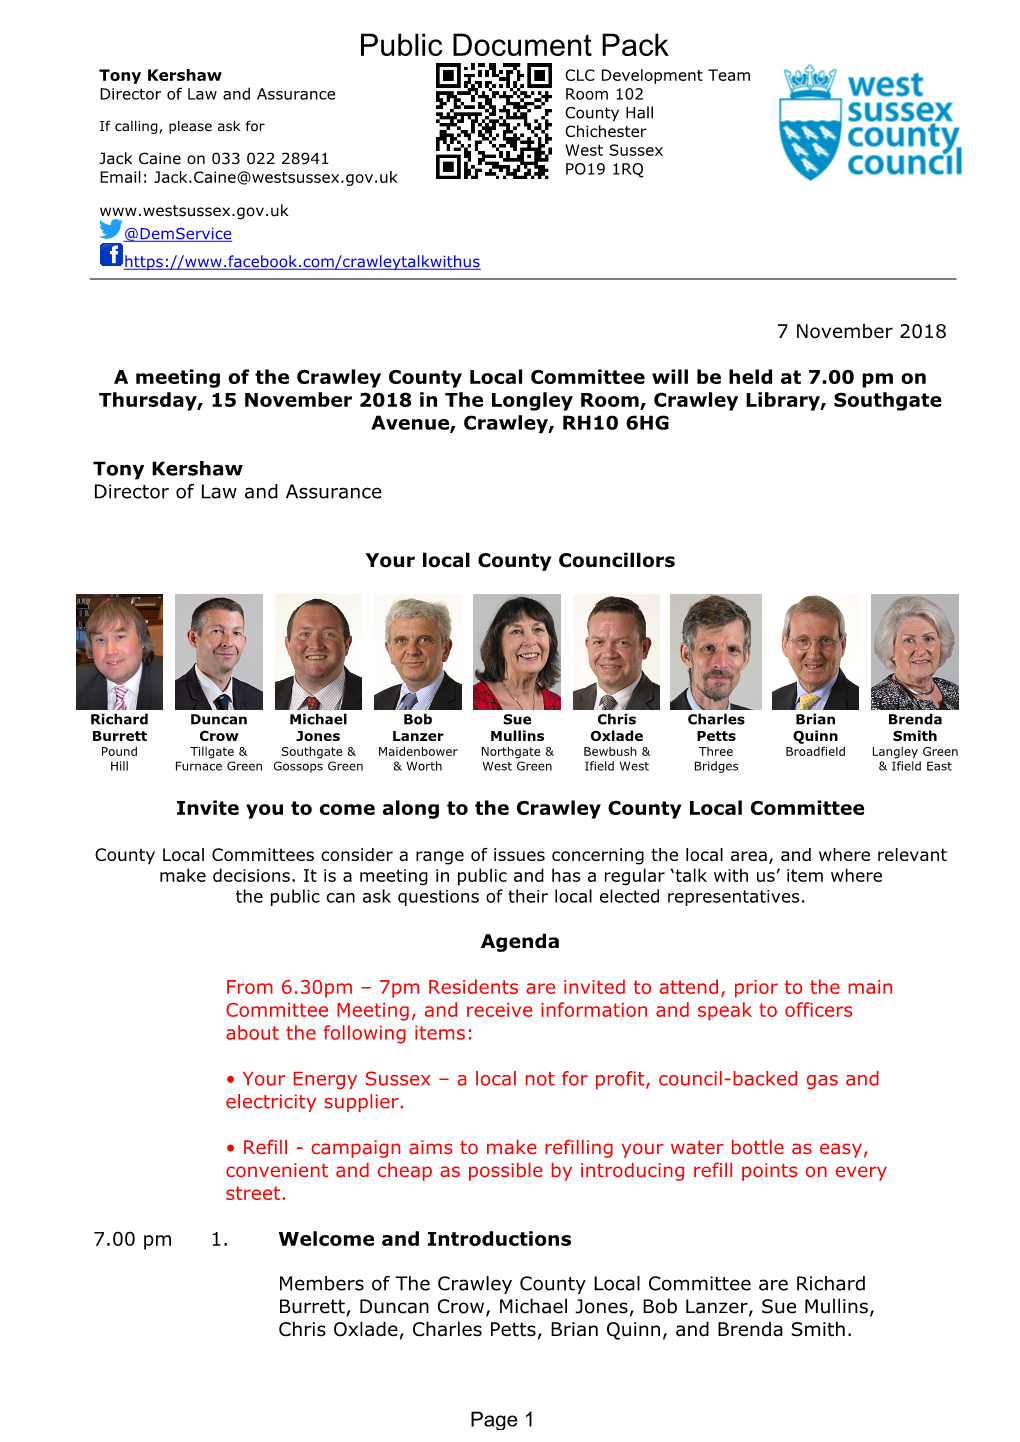 (Public Pack)Agenda Document for Crawley County Local Committee, 15/11/2018 19:00